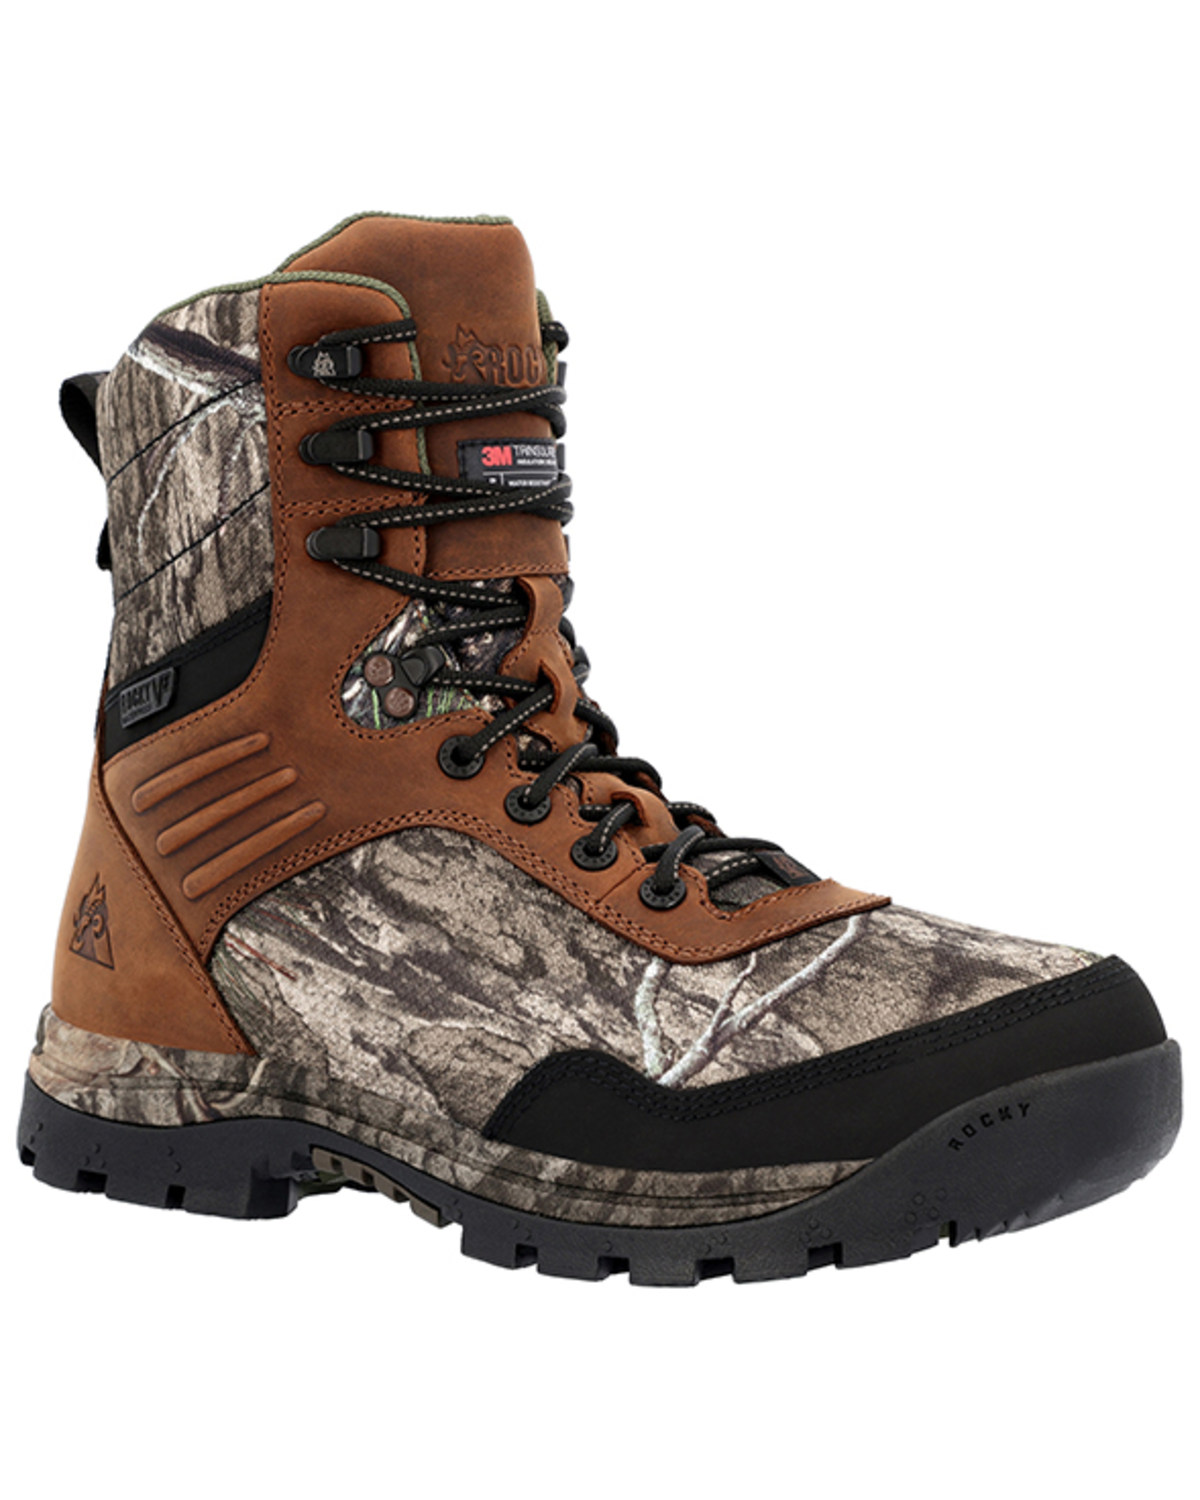 Rocky Men's Lynx Mossy Oak® Country DNA™ Waterproof 800G Insulated Work Boots - Round Toe